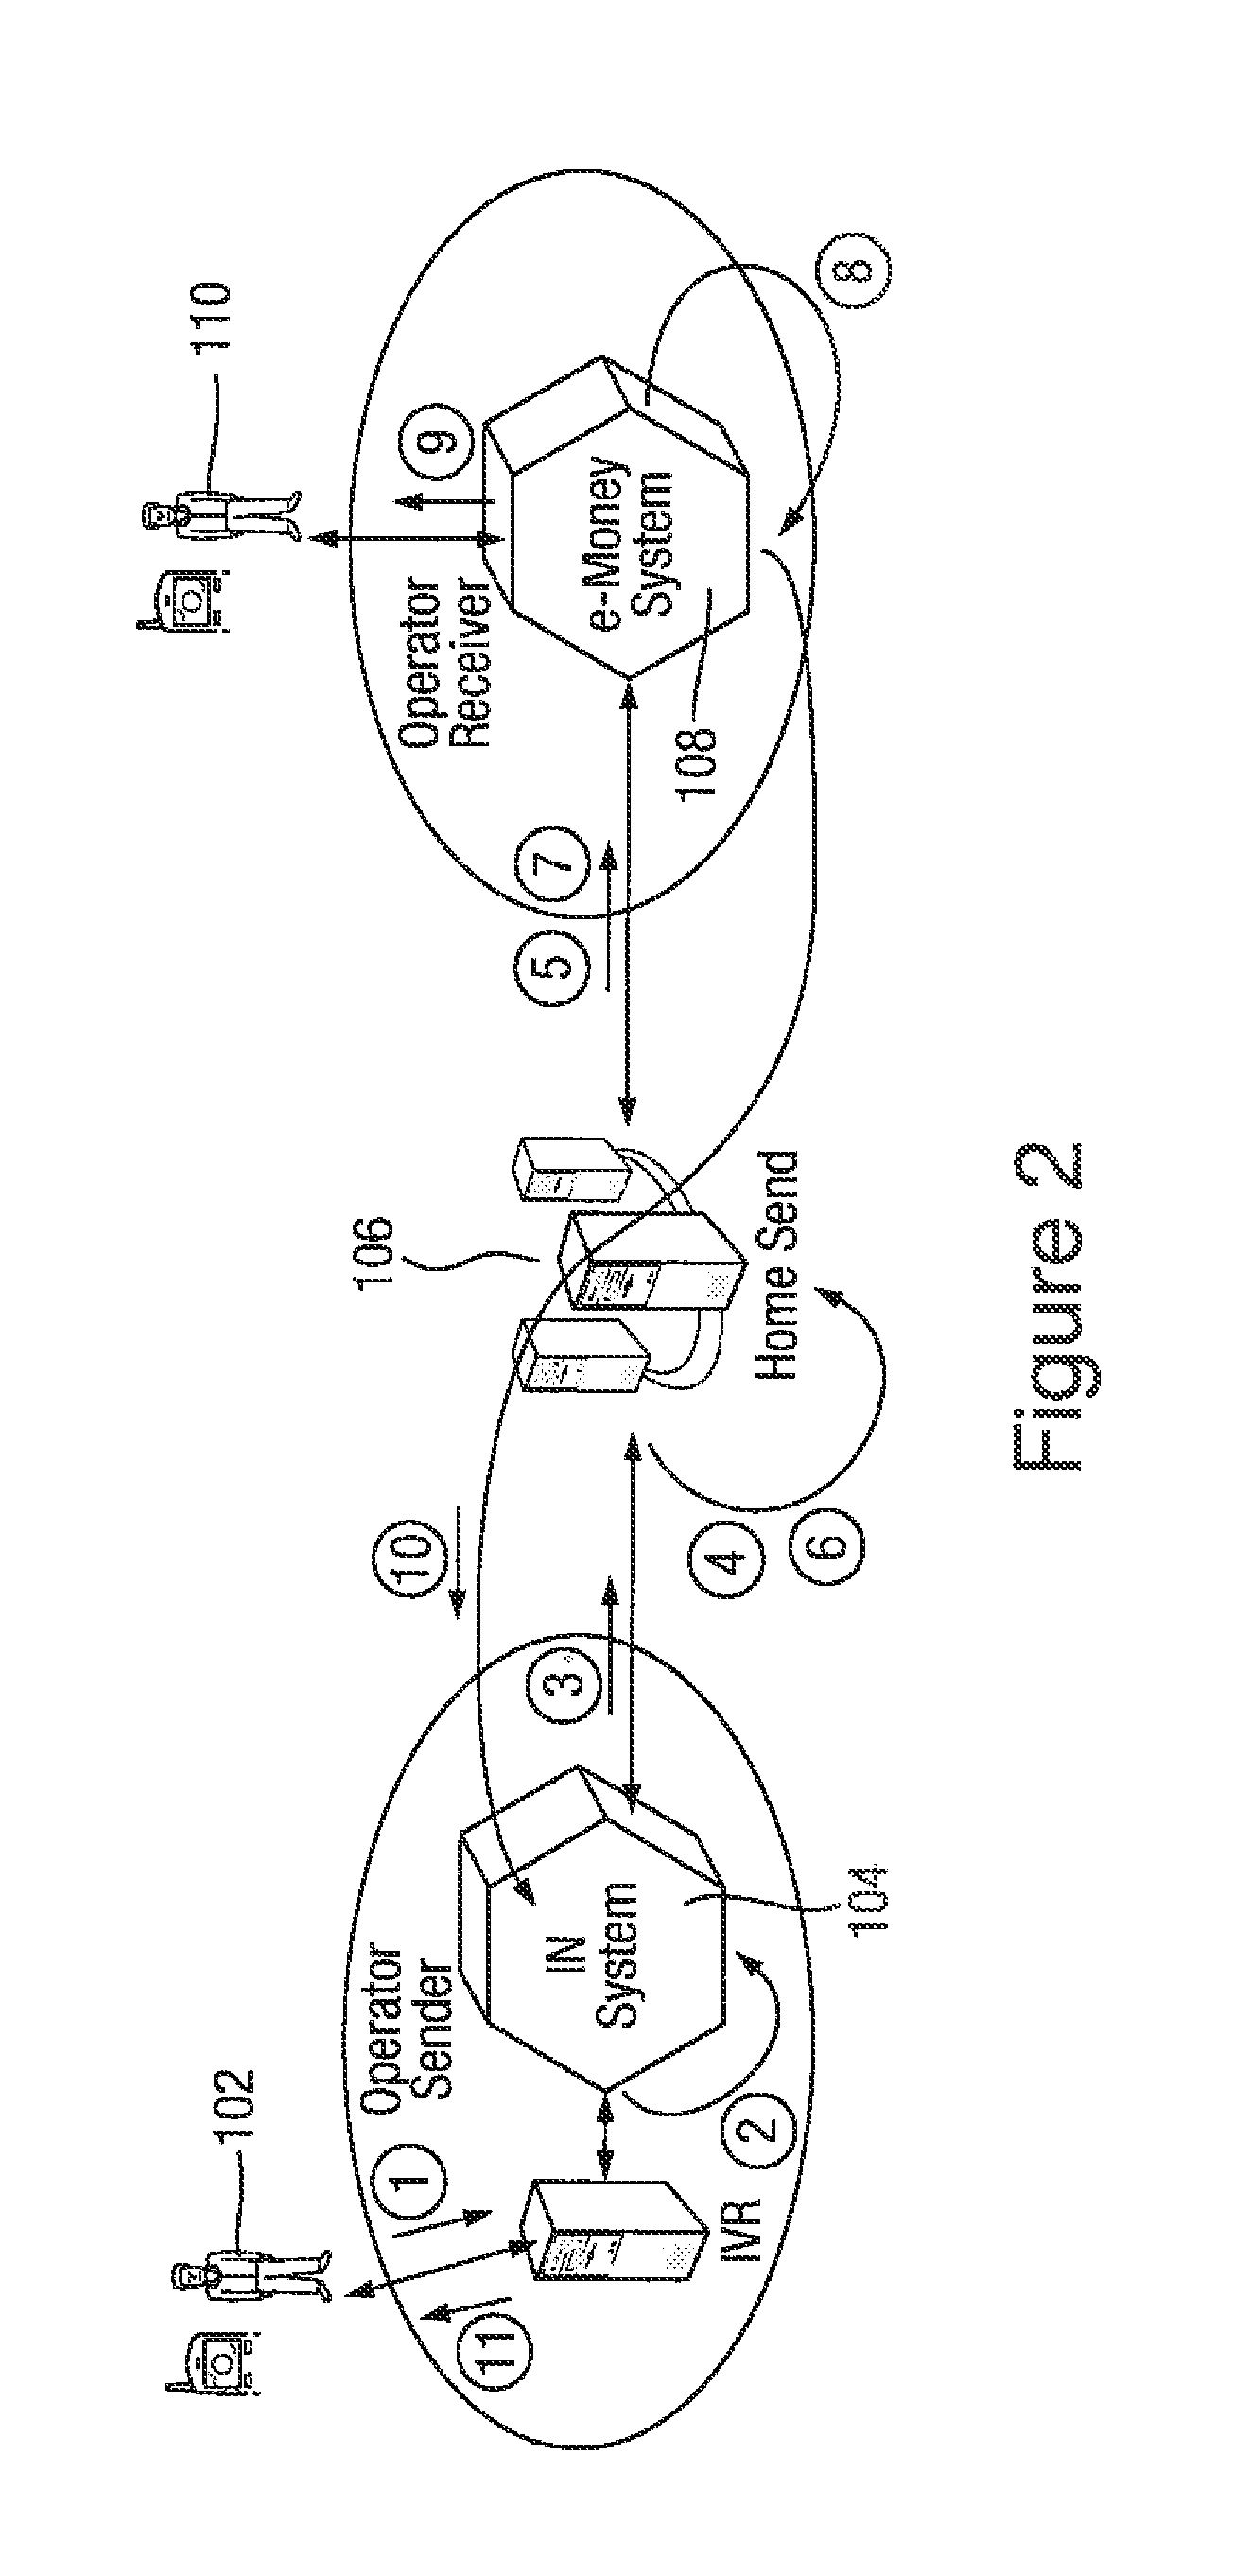 Transaction processing system and method